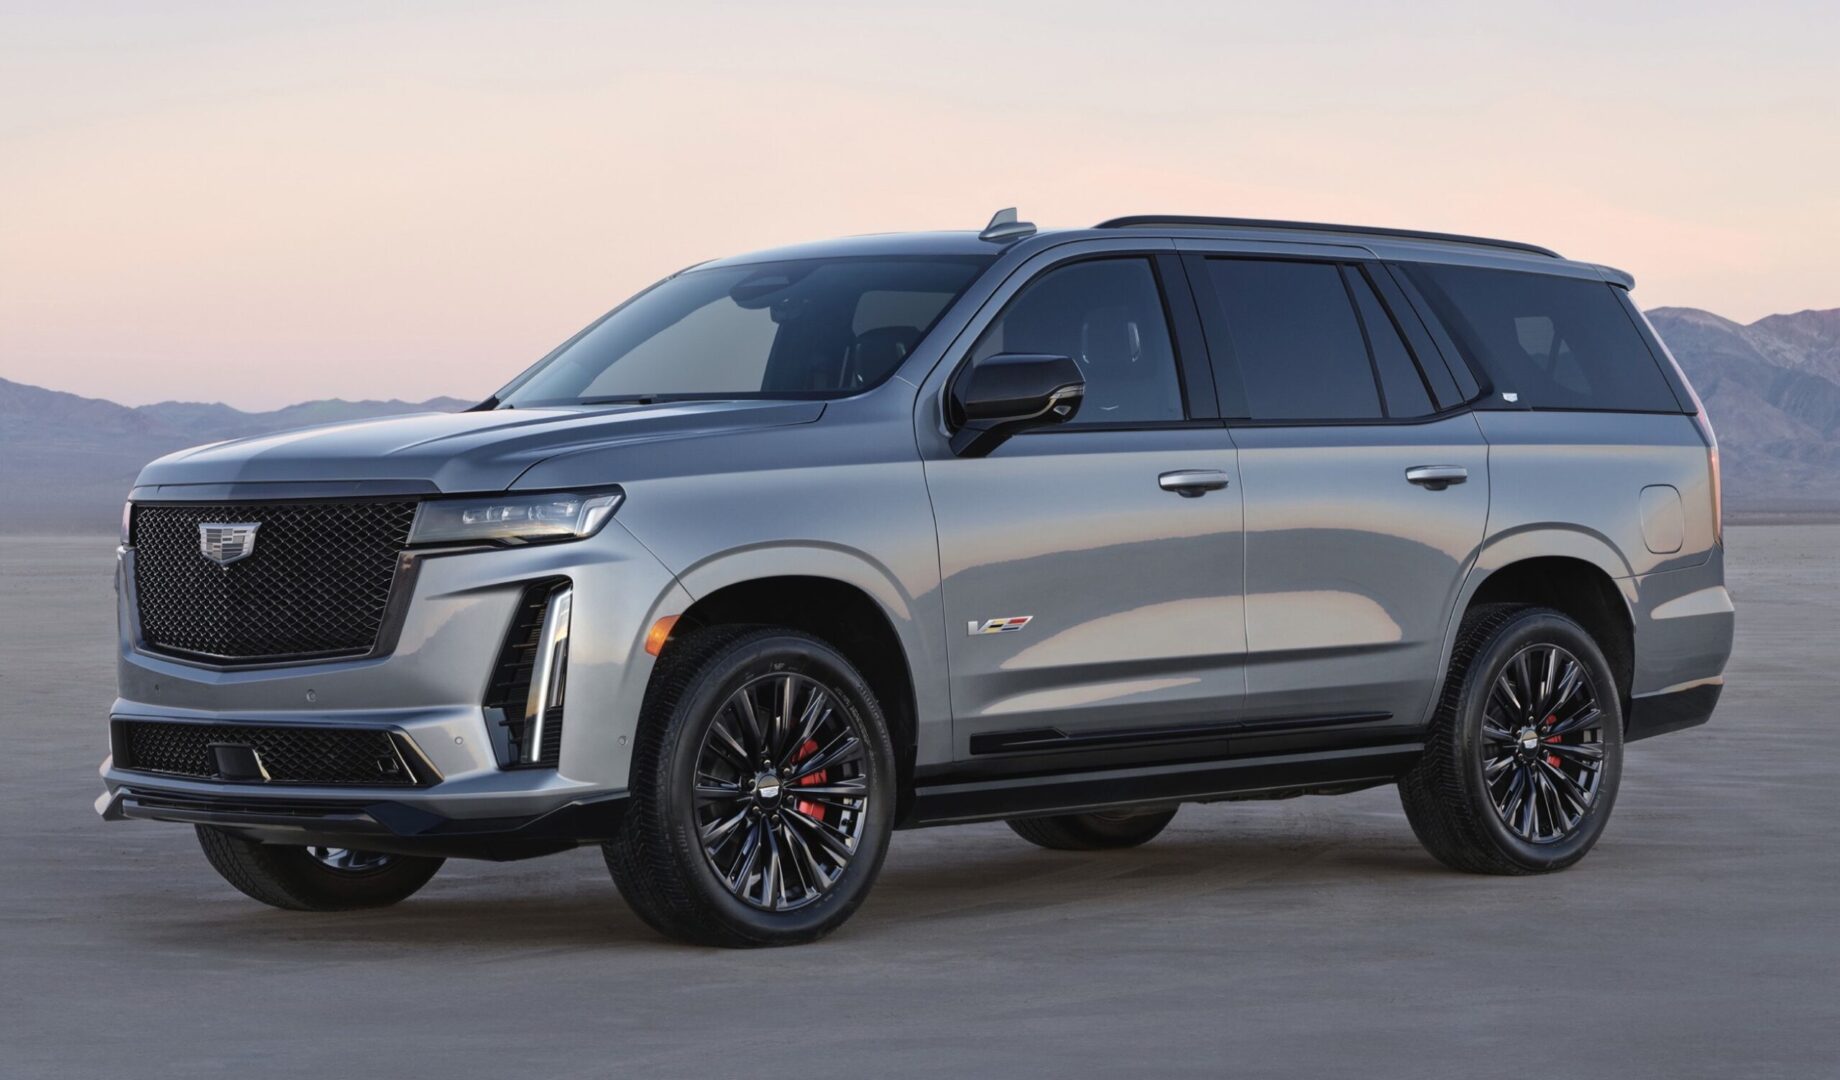 The 2020 cadillac escalade is shown in the desert.